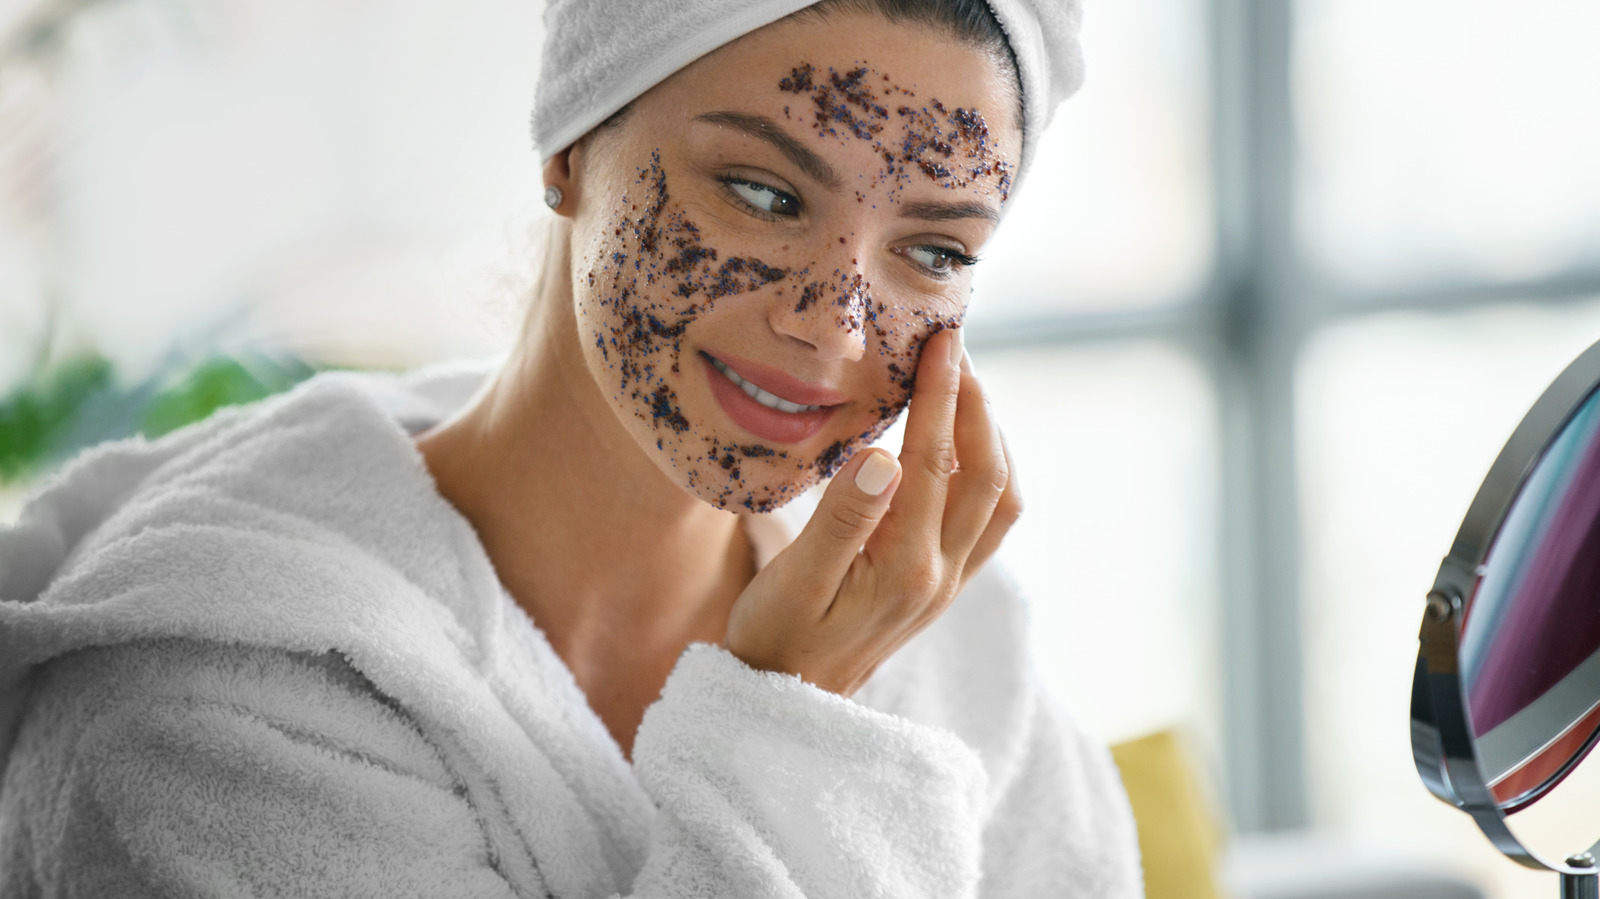 Do Physical Exfoliants Really Deserve The Bad Rep? Our Derm Weighs In